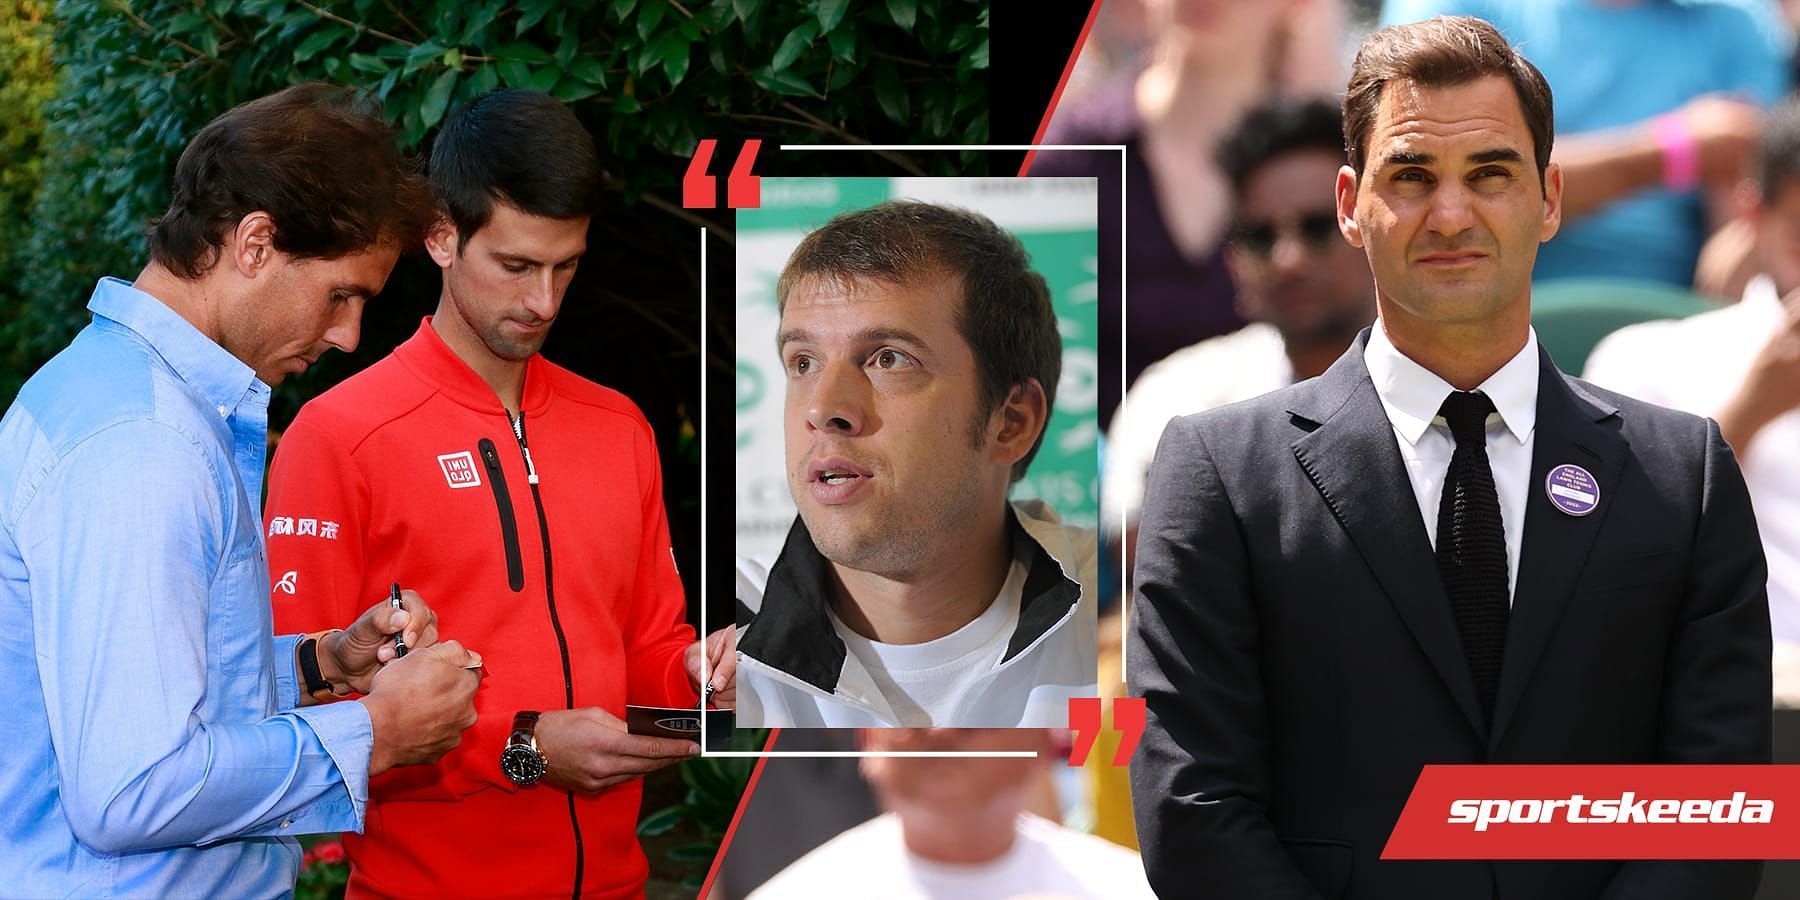 &lt;a href=&#039;https://www.sportskeeda.com/player/gilles-muller/&#039; target=&#039;_blank&#039; rel=&#039;noopener noreferrer&#039;&gt;Gilles Muller&lt;/a&gt; [inset] believes &lt;a href=&#039;https://www.sportskeeda.com/player/roger-federer&#039; target=&#039;_blank&#039; rel=&#039;noopener noreferrer&#039;&gt;Roger Federer&lt;/a&gt; [right] has contributed more to the sport than Rafael Nadal and Novak Djokovic.